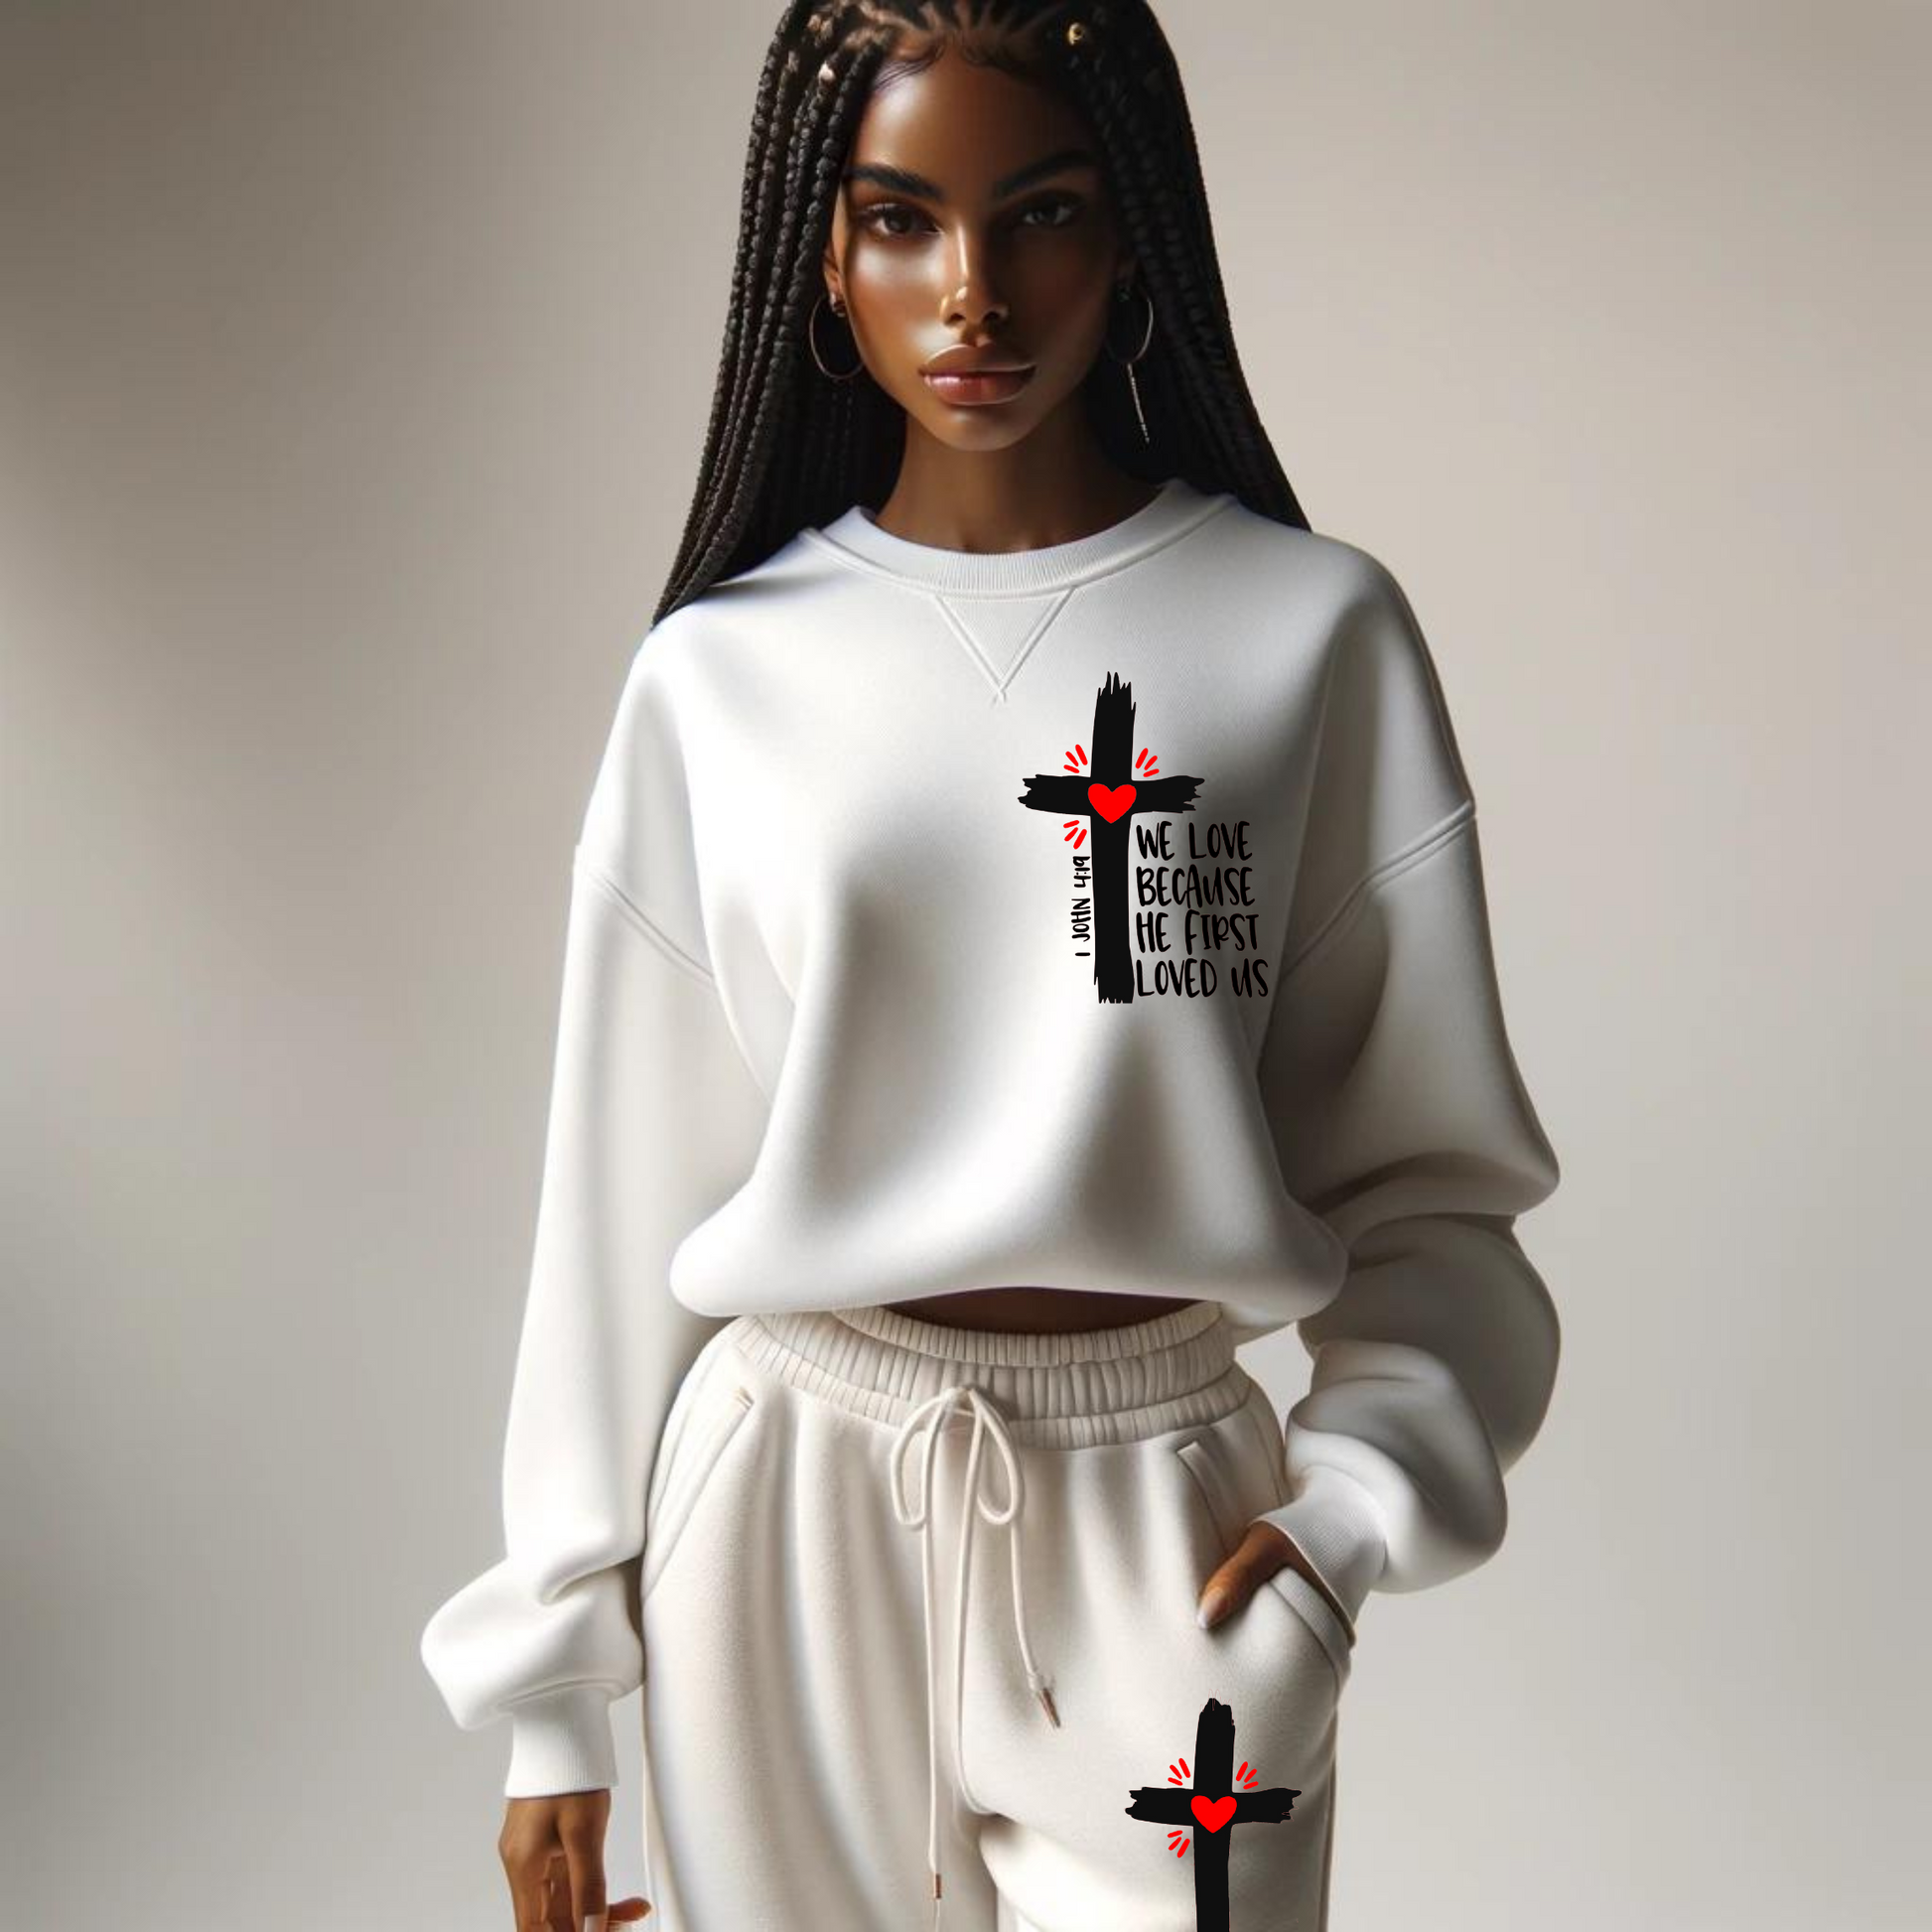 African American Woman with white sweat suit and jogging pants. Black Cross with the words We Love because he first Loved 